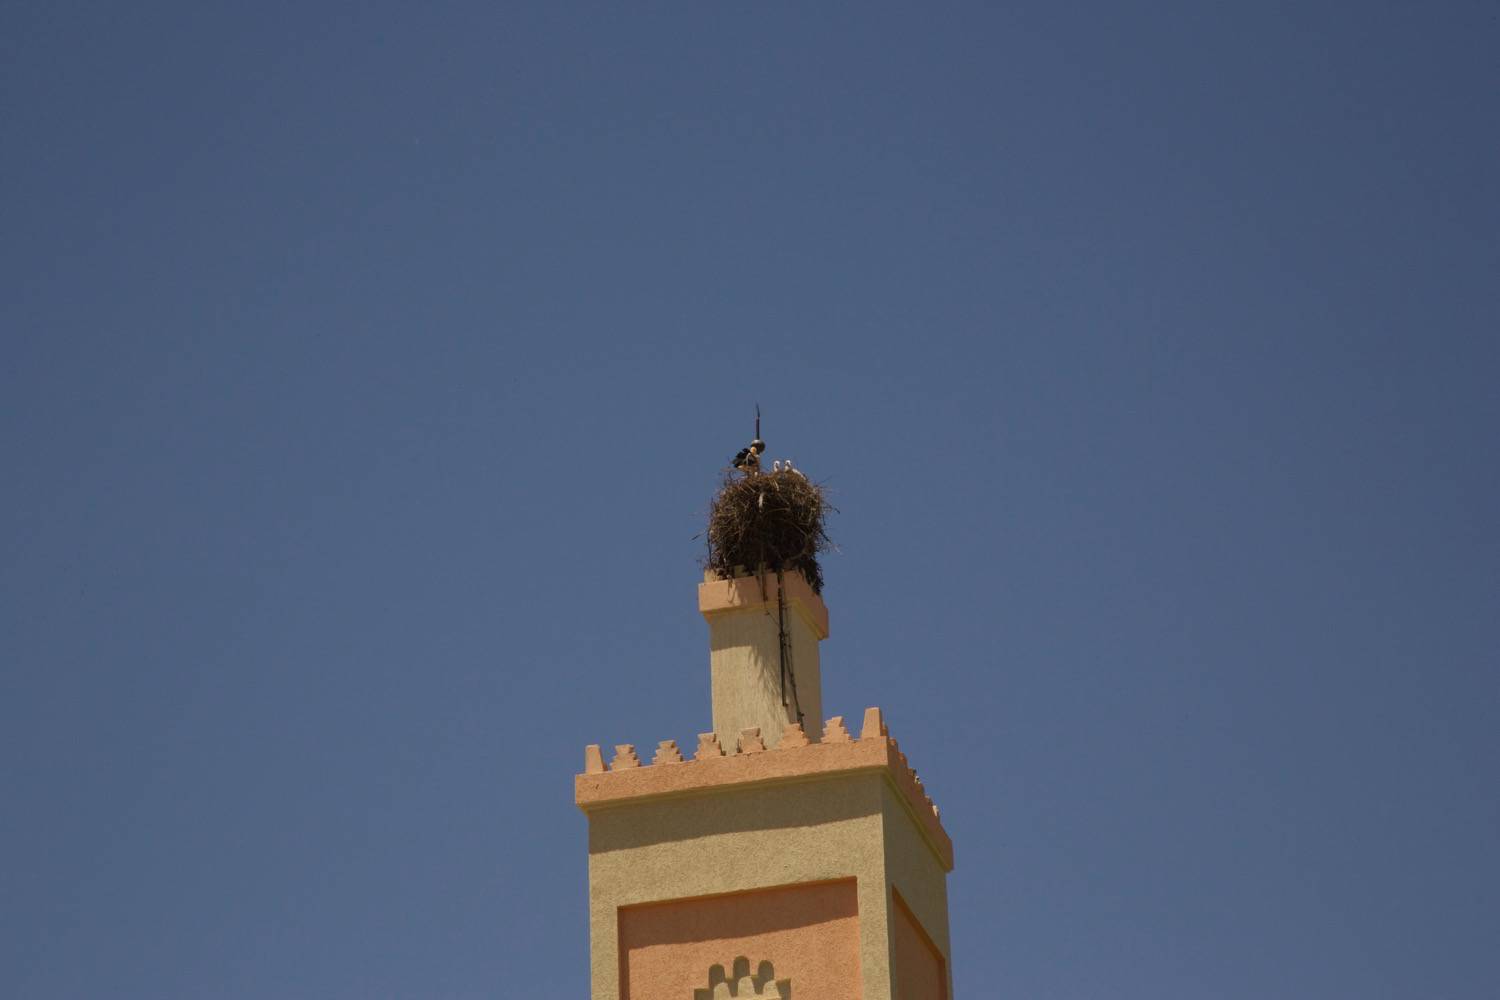 Close view of a storks' nest on the top of the minaret